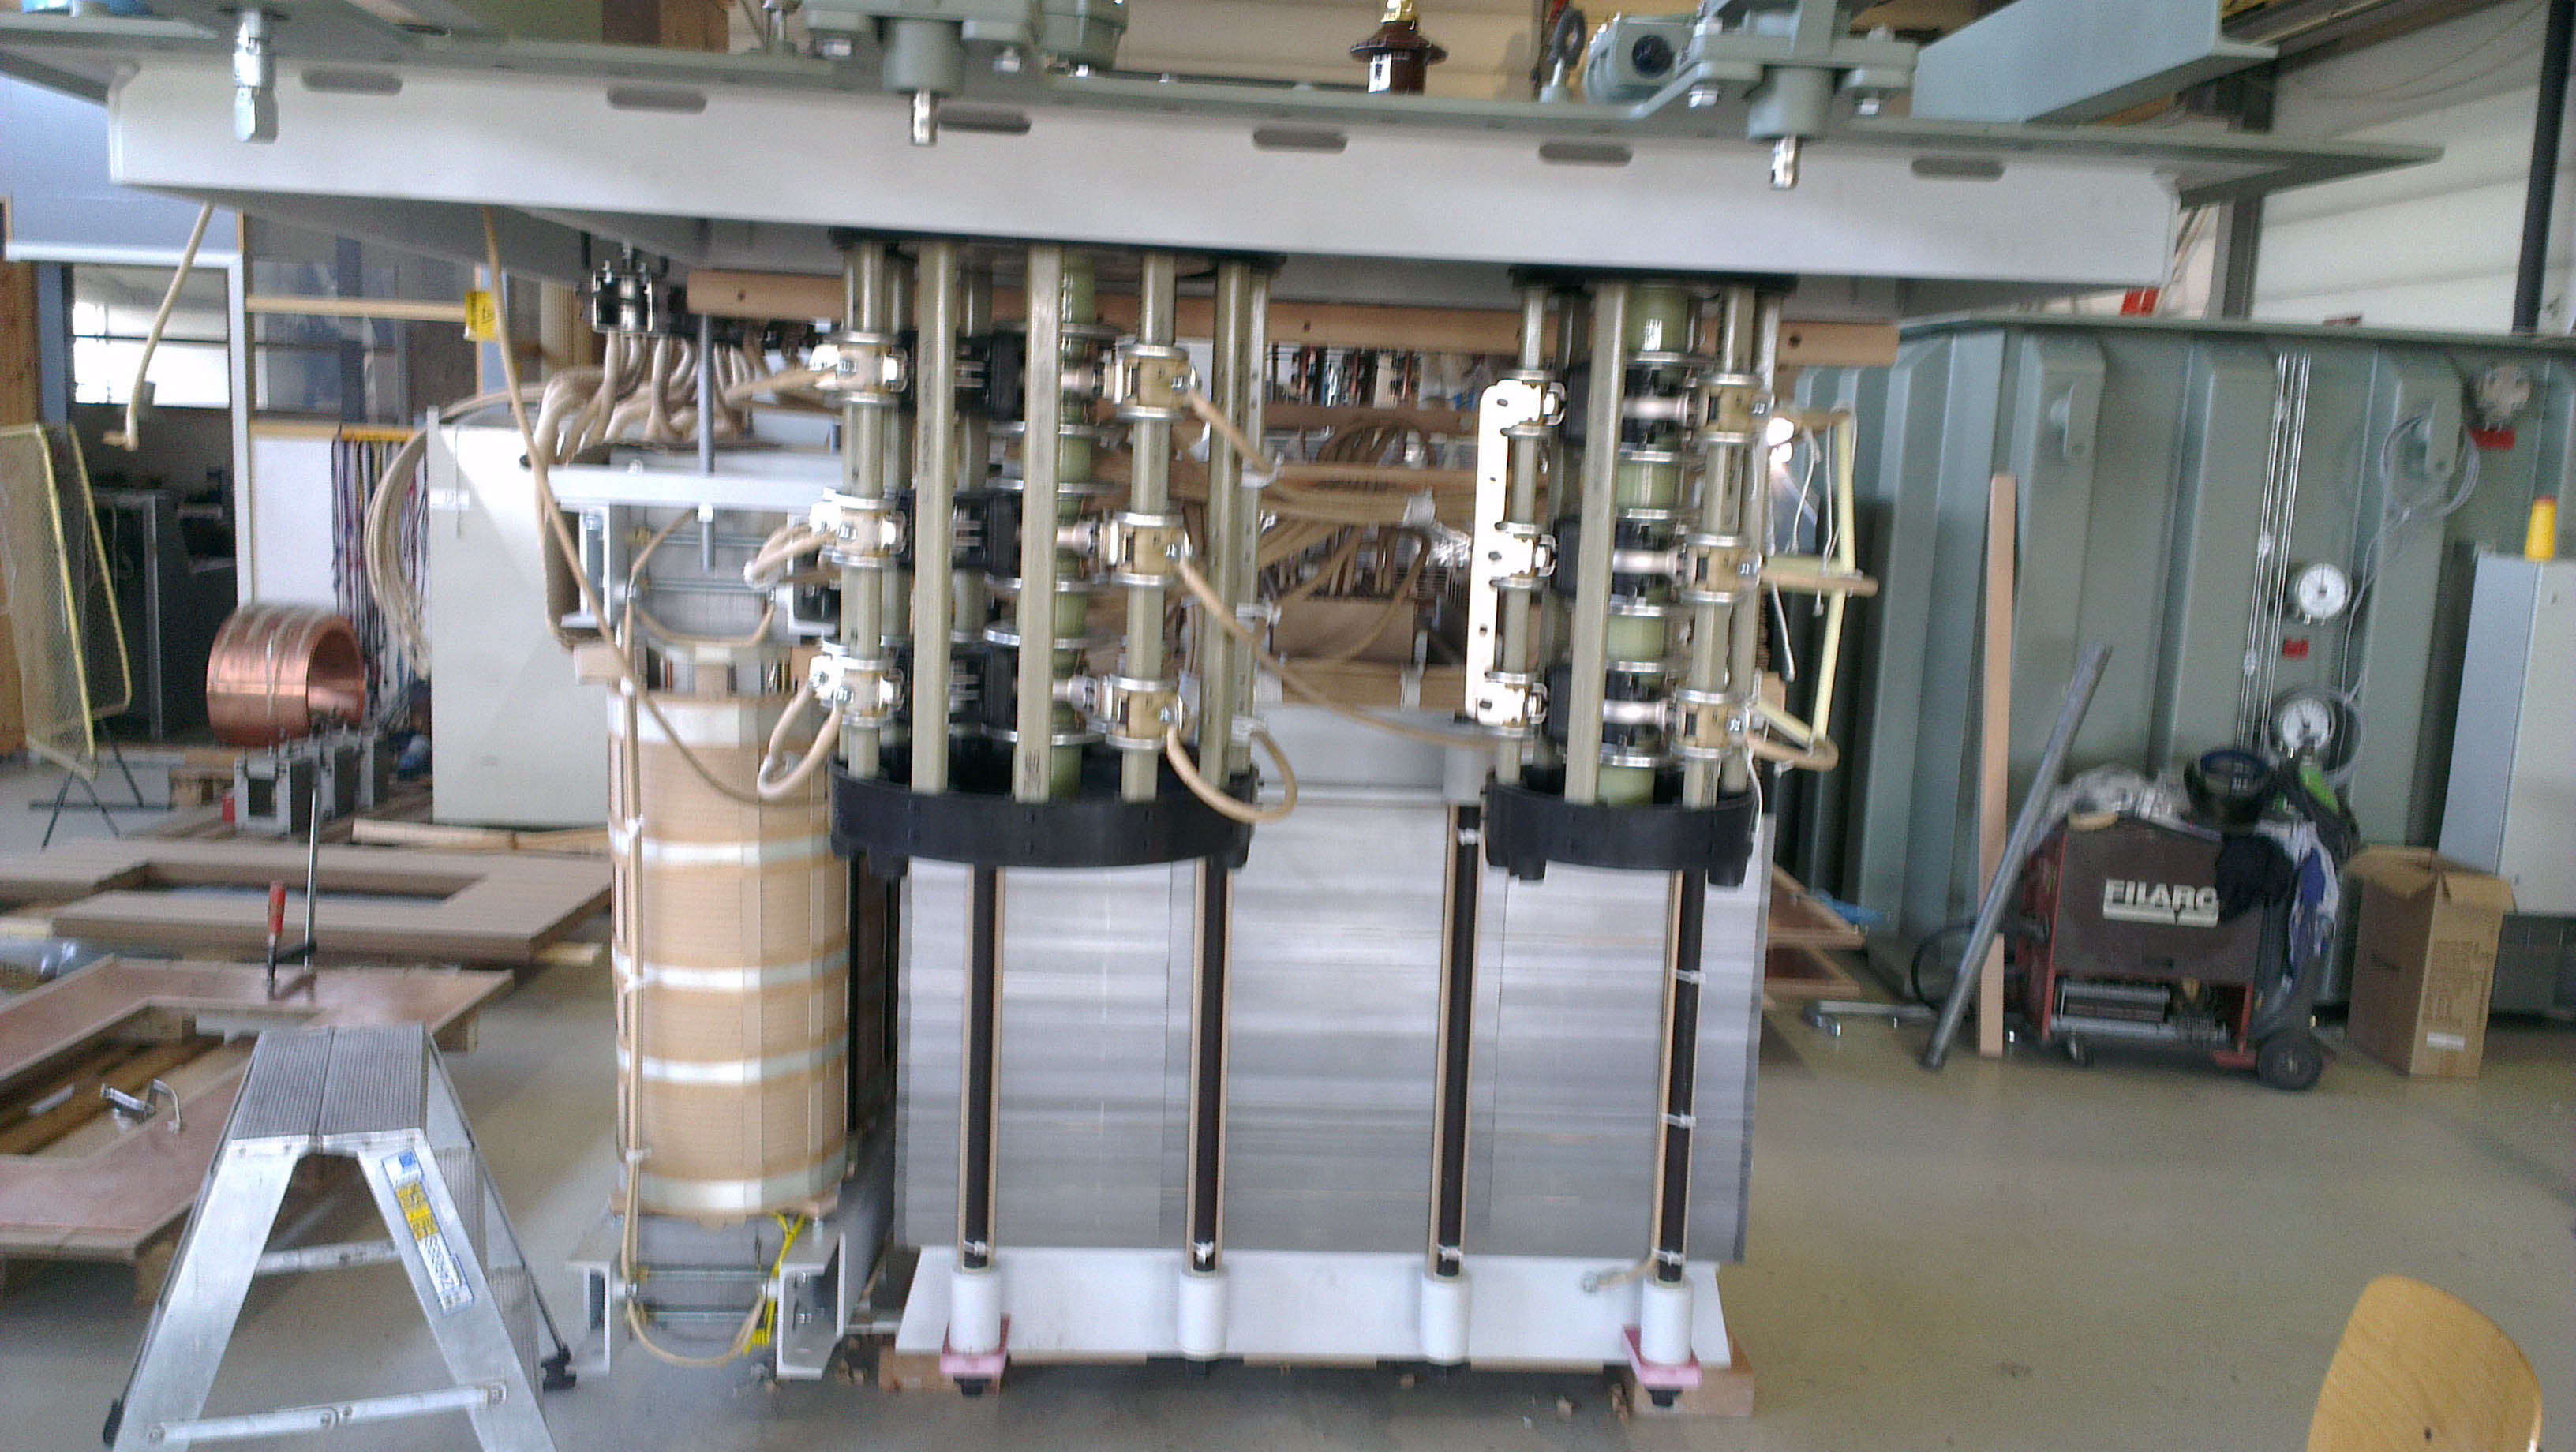 Furnace transformer with serie reactor build in